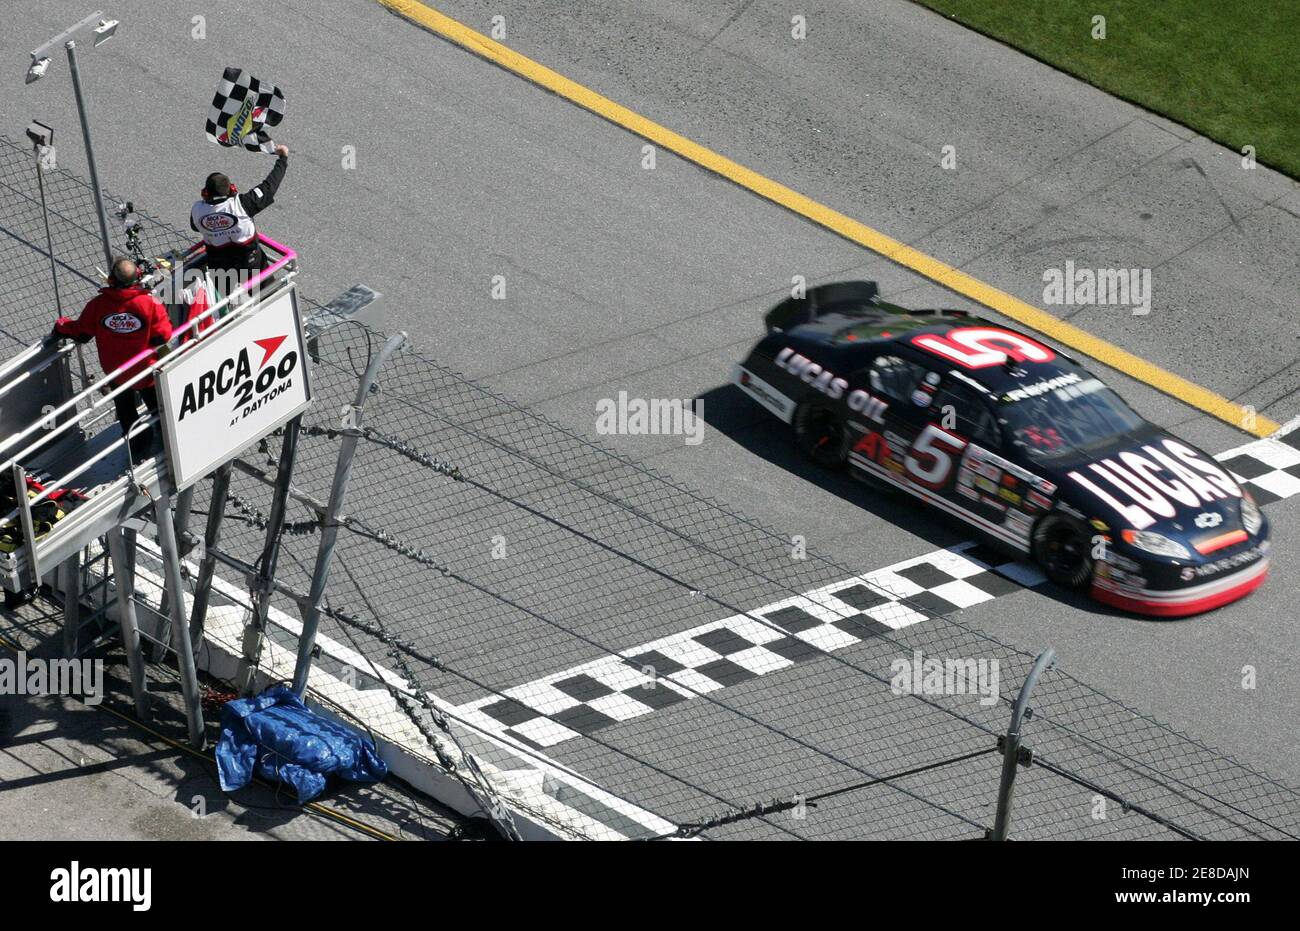 Bobby Gerhart takes the checkered flag in the 5 Lucas Oil Chevrolet to win the ARCA 200 at the Daytona International Speedway in Daytona Beach, Florida February 12, 2006.  REUTERS/Rick Fowler Stock Photo